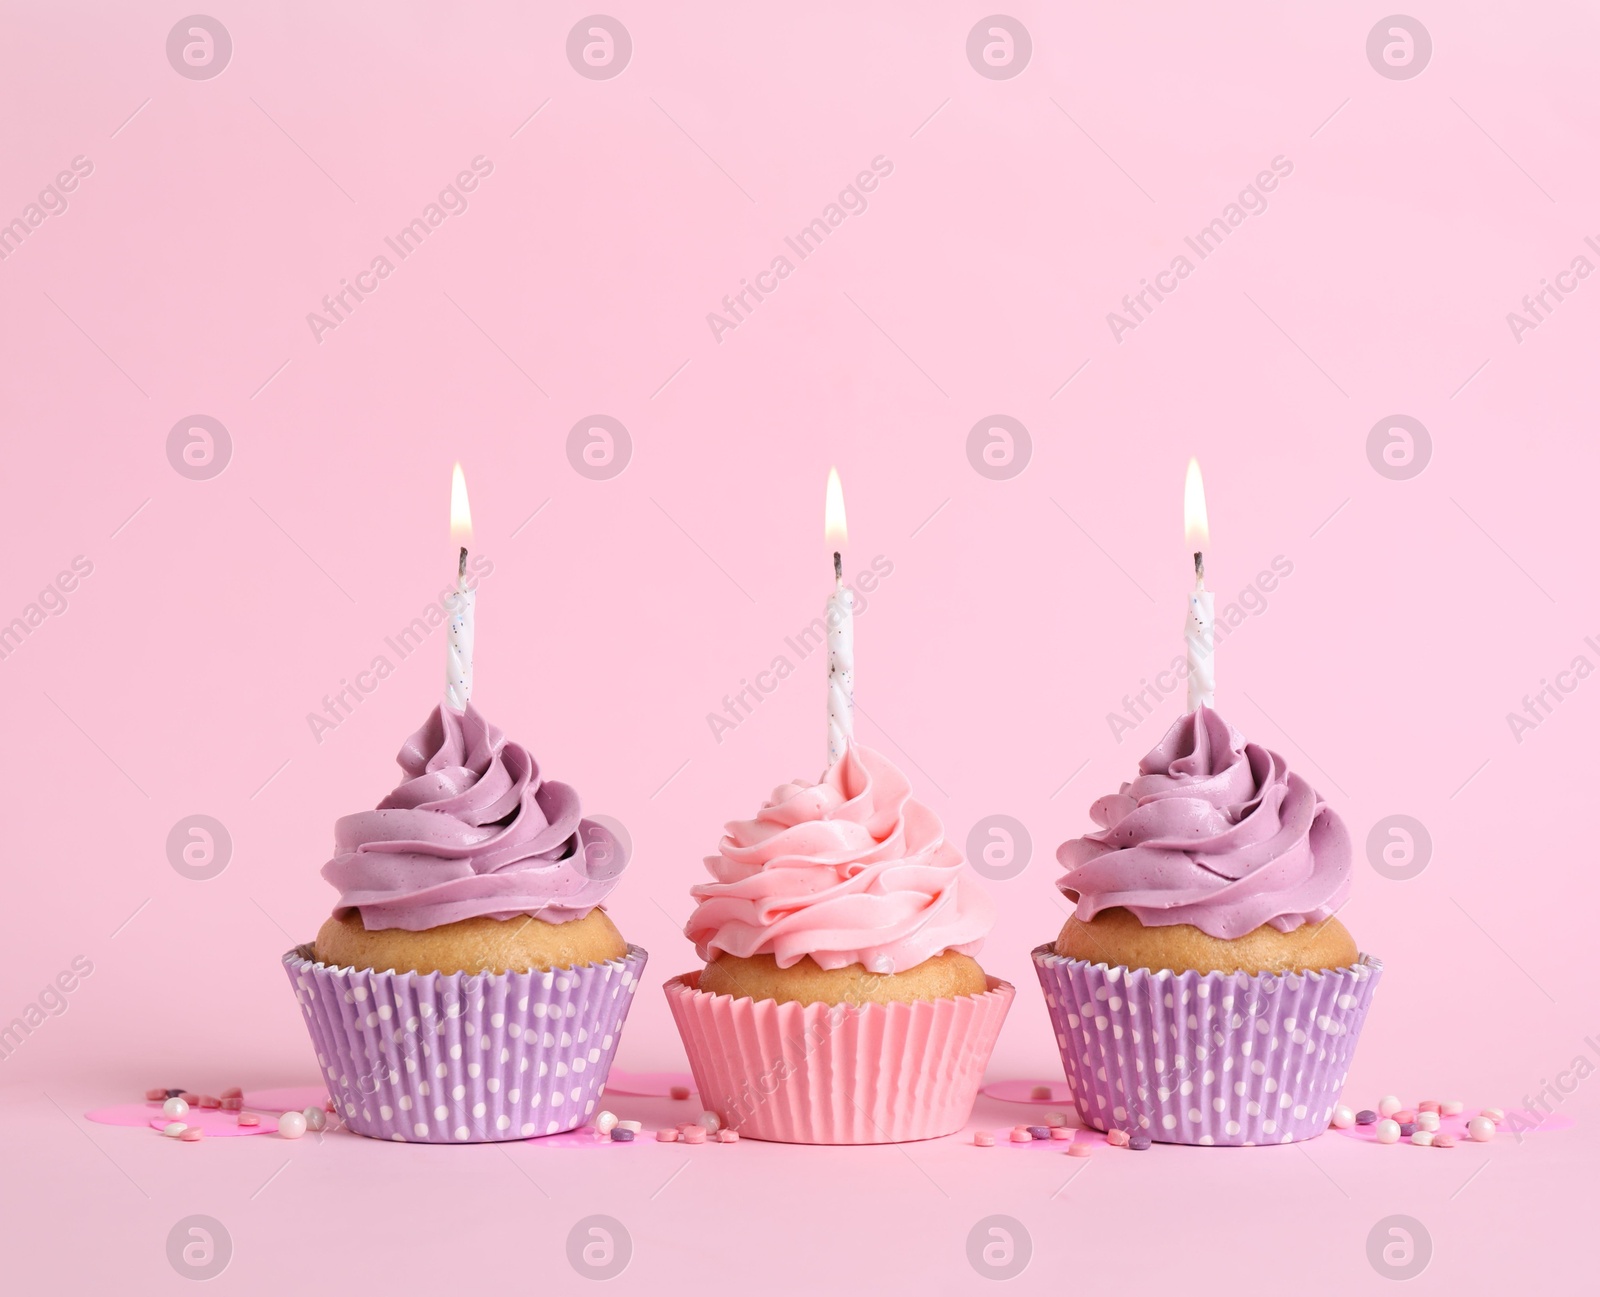 Photo of Delicious birthday cupcakes with burning candles and sprinkles on pink background